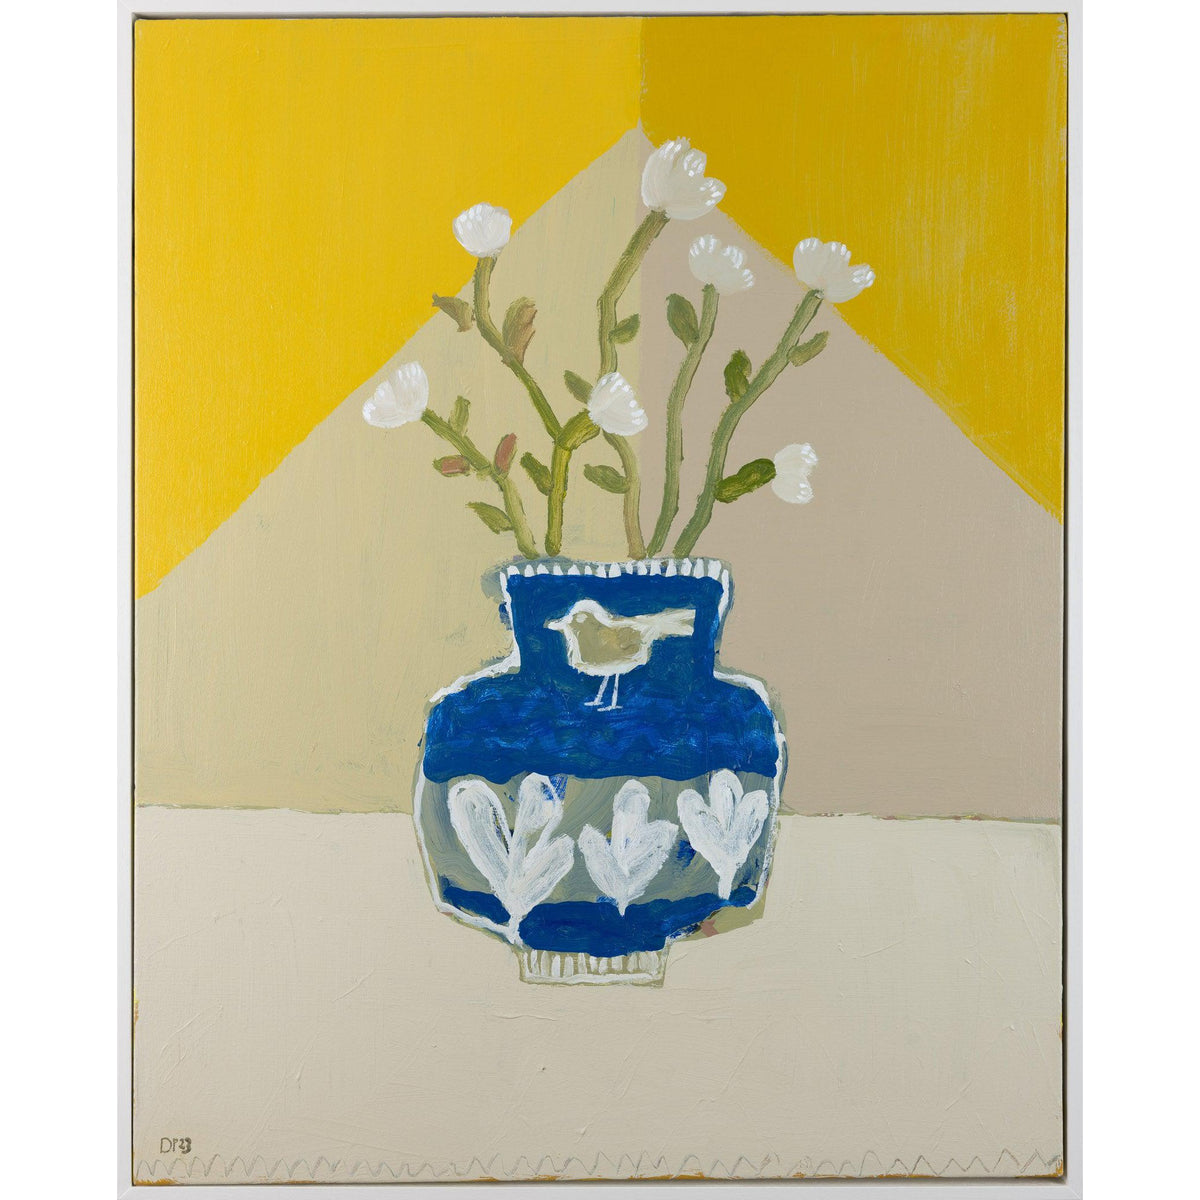 &#39;Blue Bird Vase&#39; acrylic on canvas by David Pearce fine art, available at Padstow Gallery, Cornwall